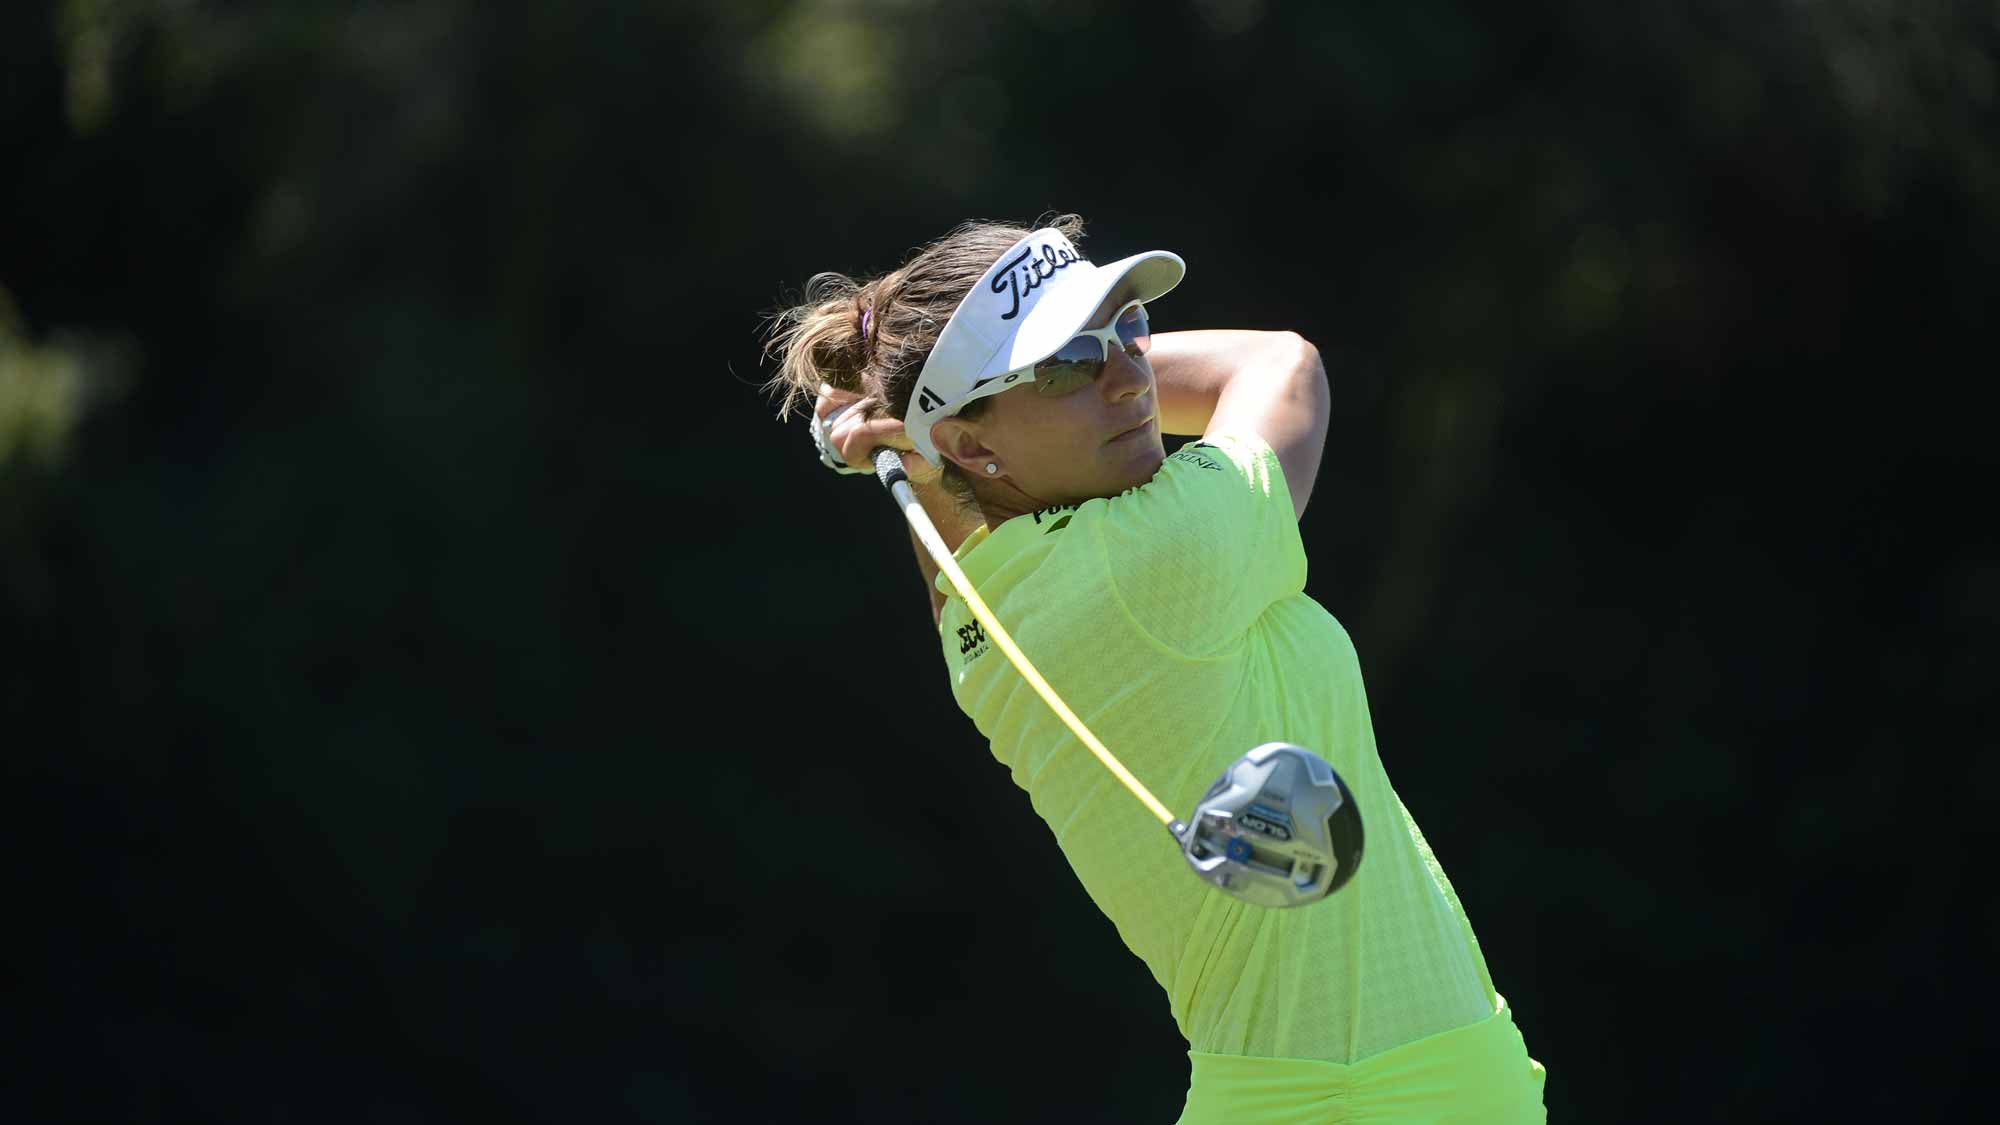 Brittany Lang tees off at the 2nd hole during Final Round of the LPGA KIA Classic at the Aviara Golf Club